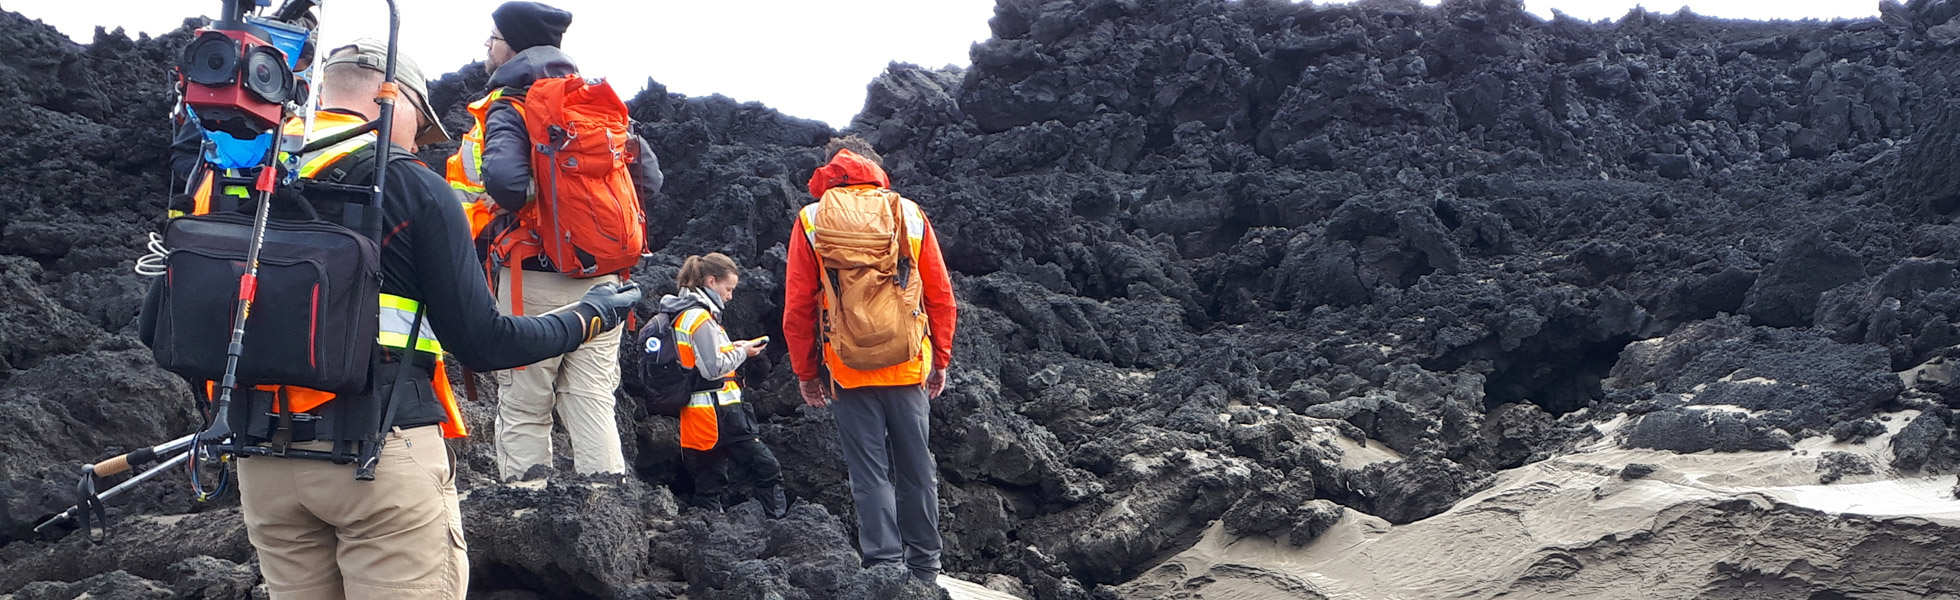 A team of researchers exploring black geological formations in Iceland.